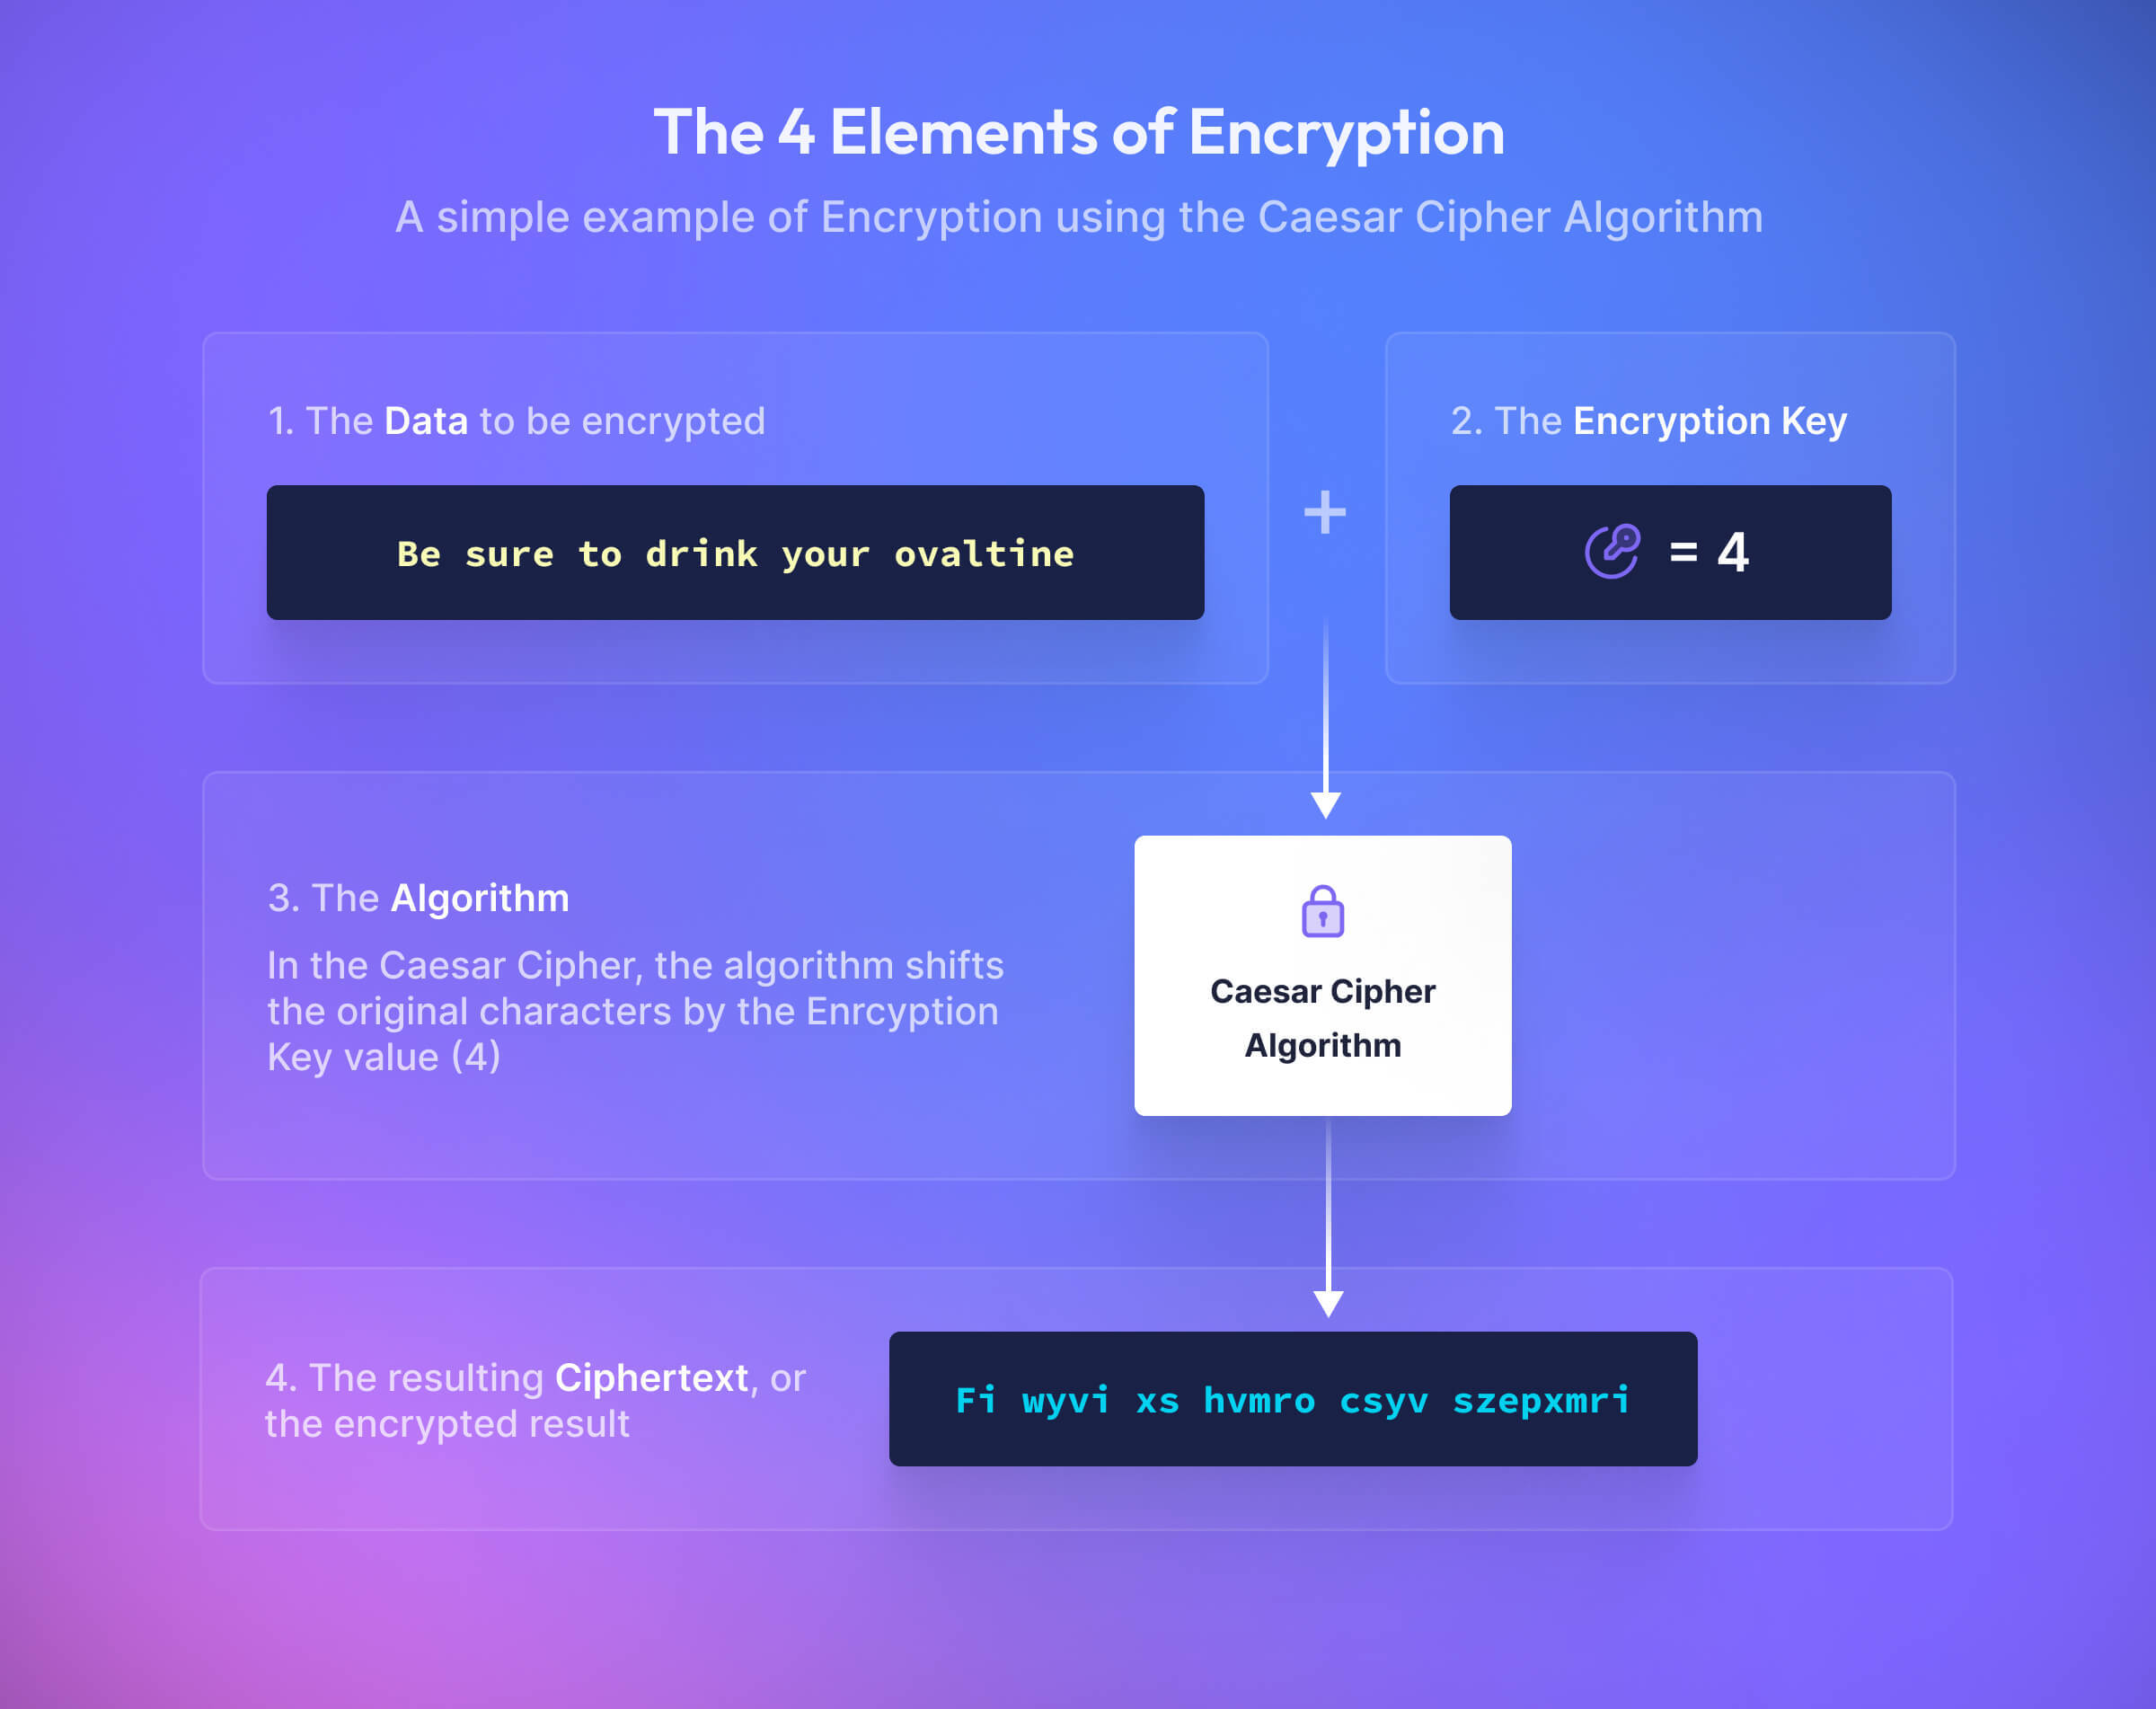 Uses the Caesar cipher algorithm to identify the 4 components of encryption: the data, the encryption key, the algorithm, and the ciphertext